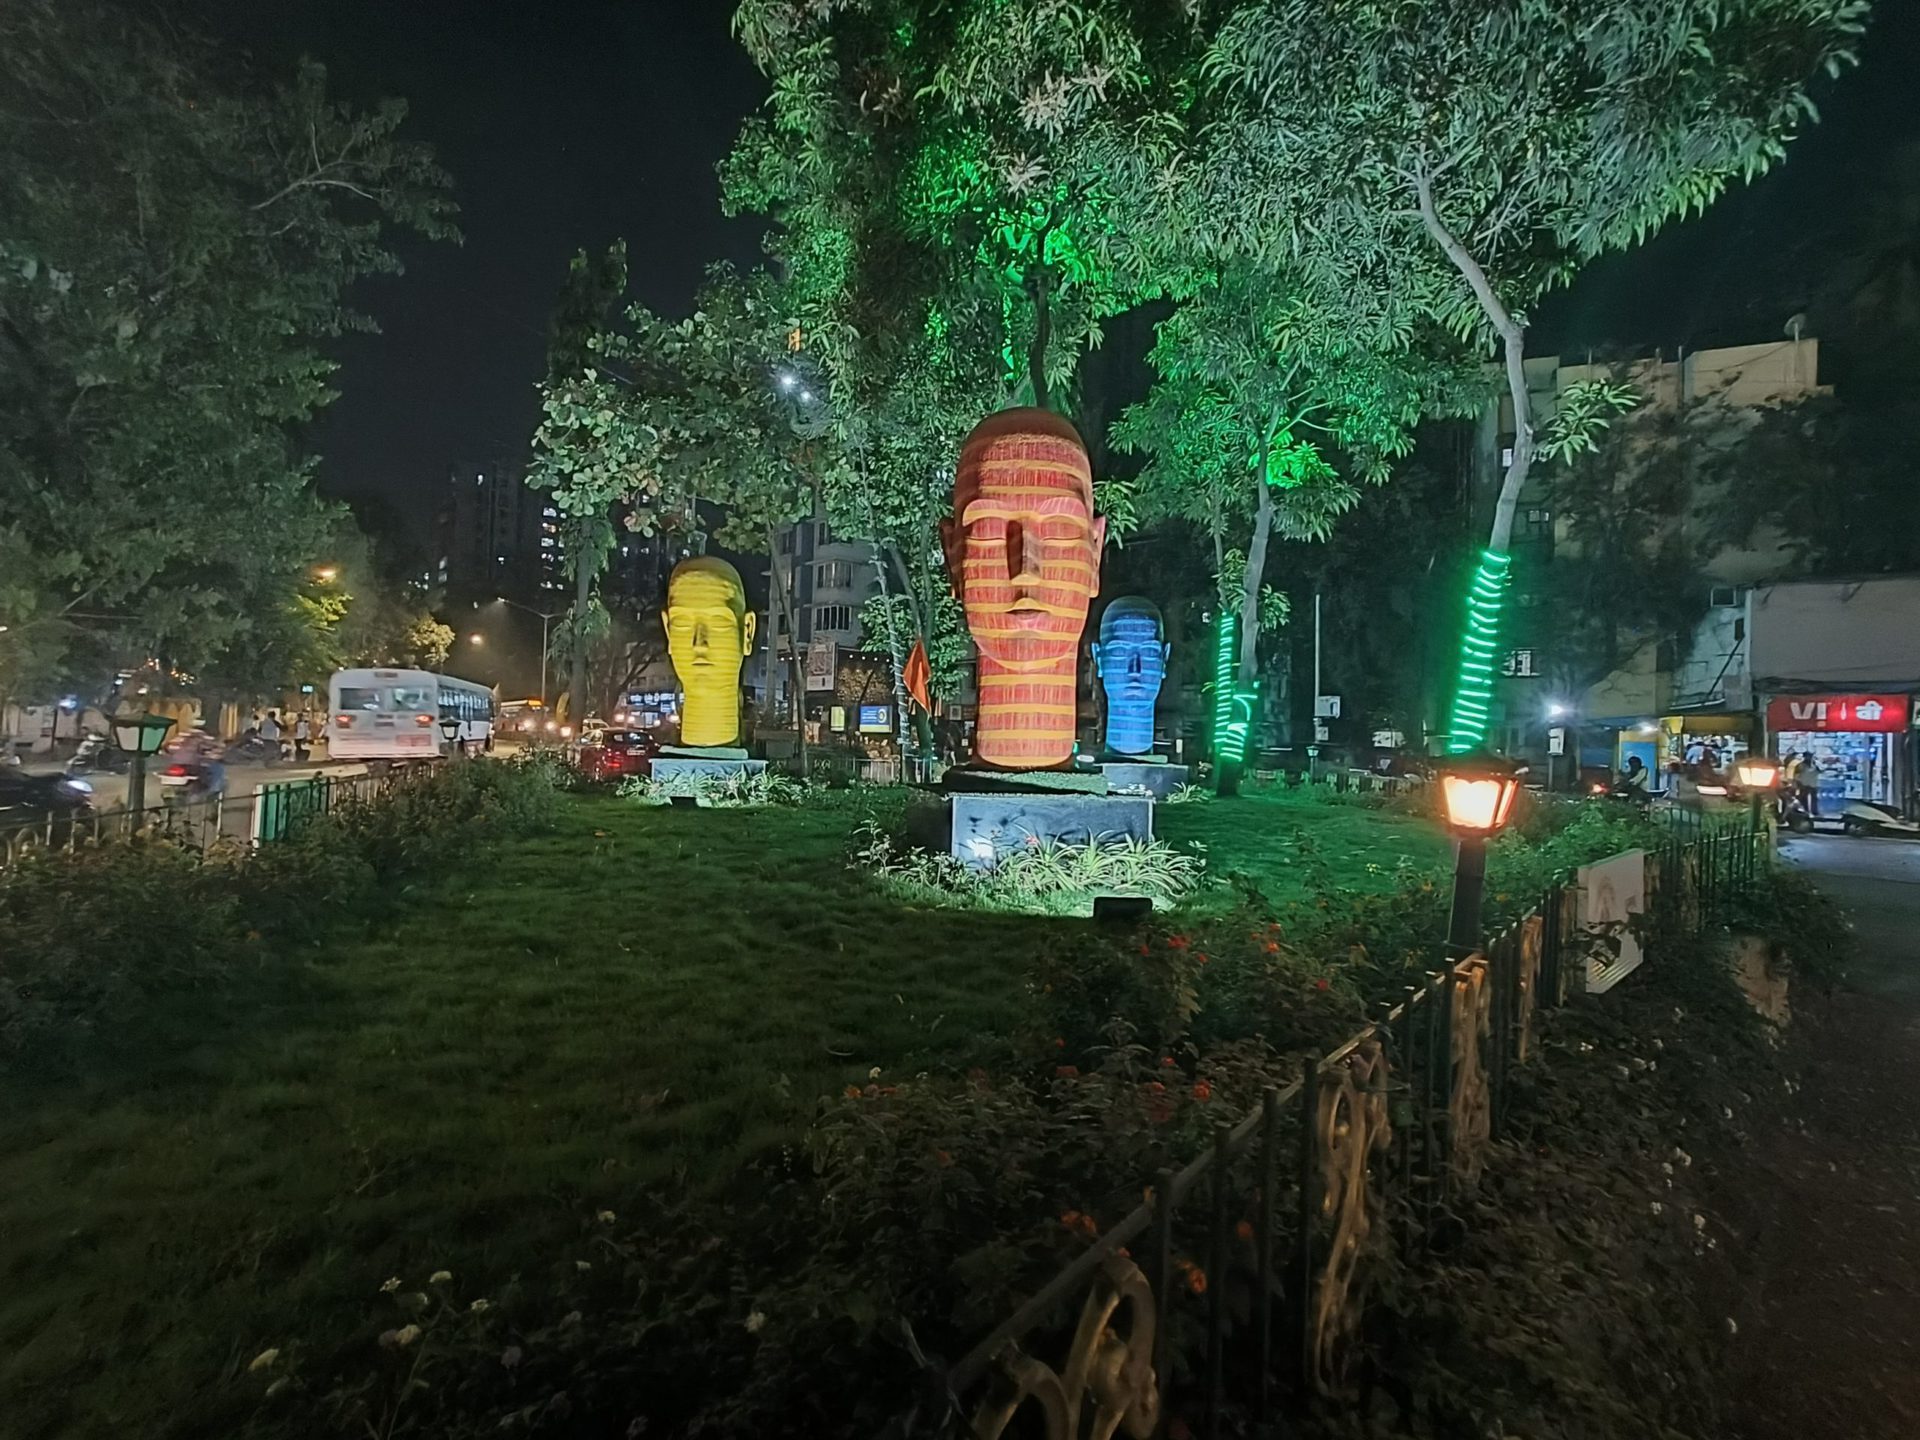 oppo reno 7 pro camera sample ultrawide with night mode of colorful head sculptures in a park.